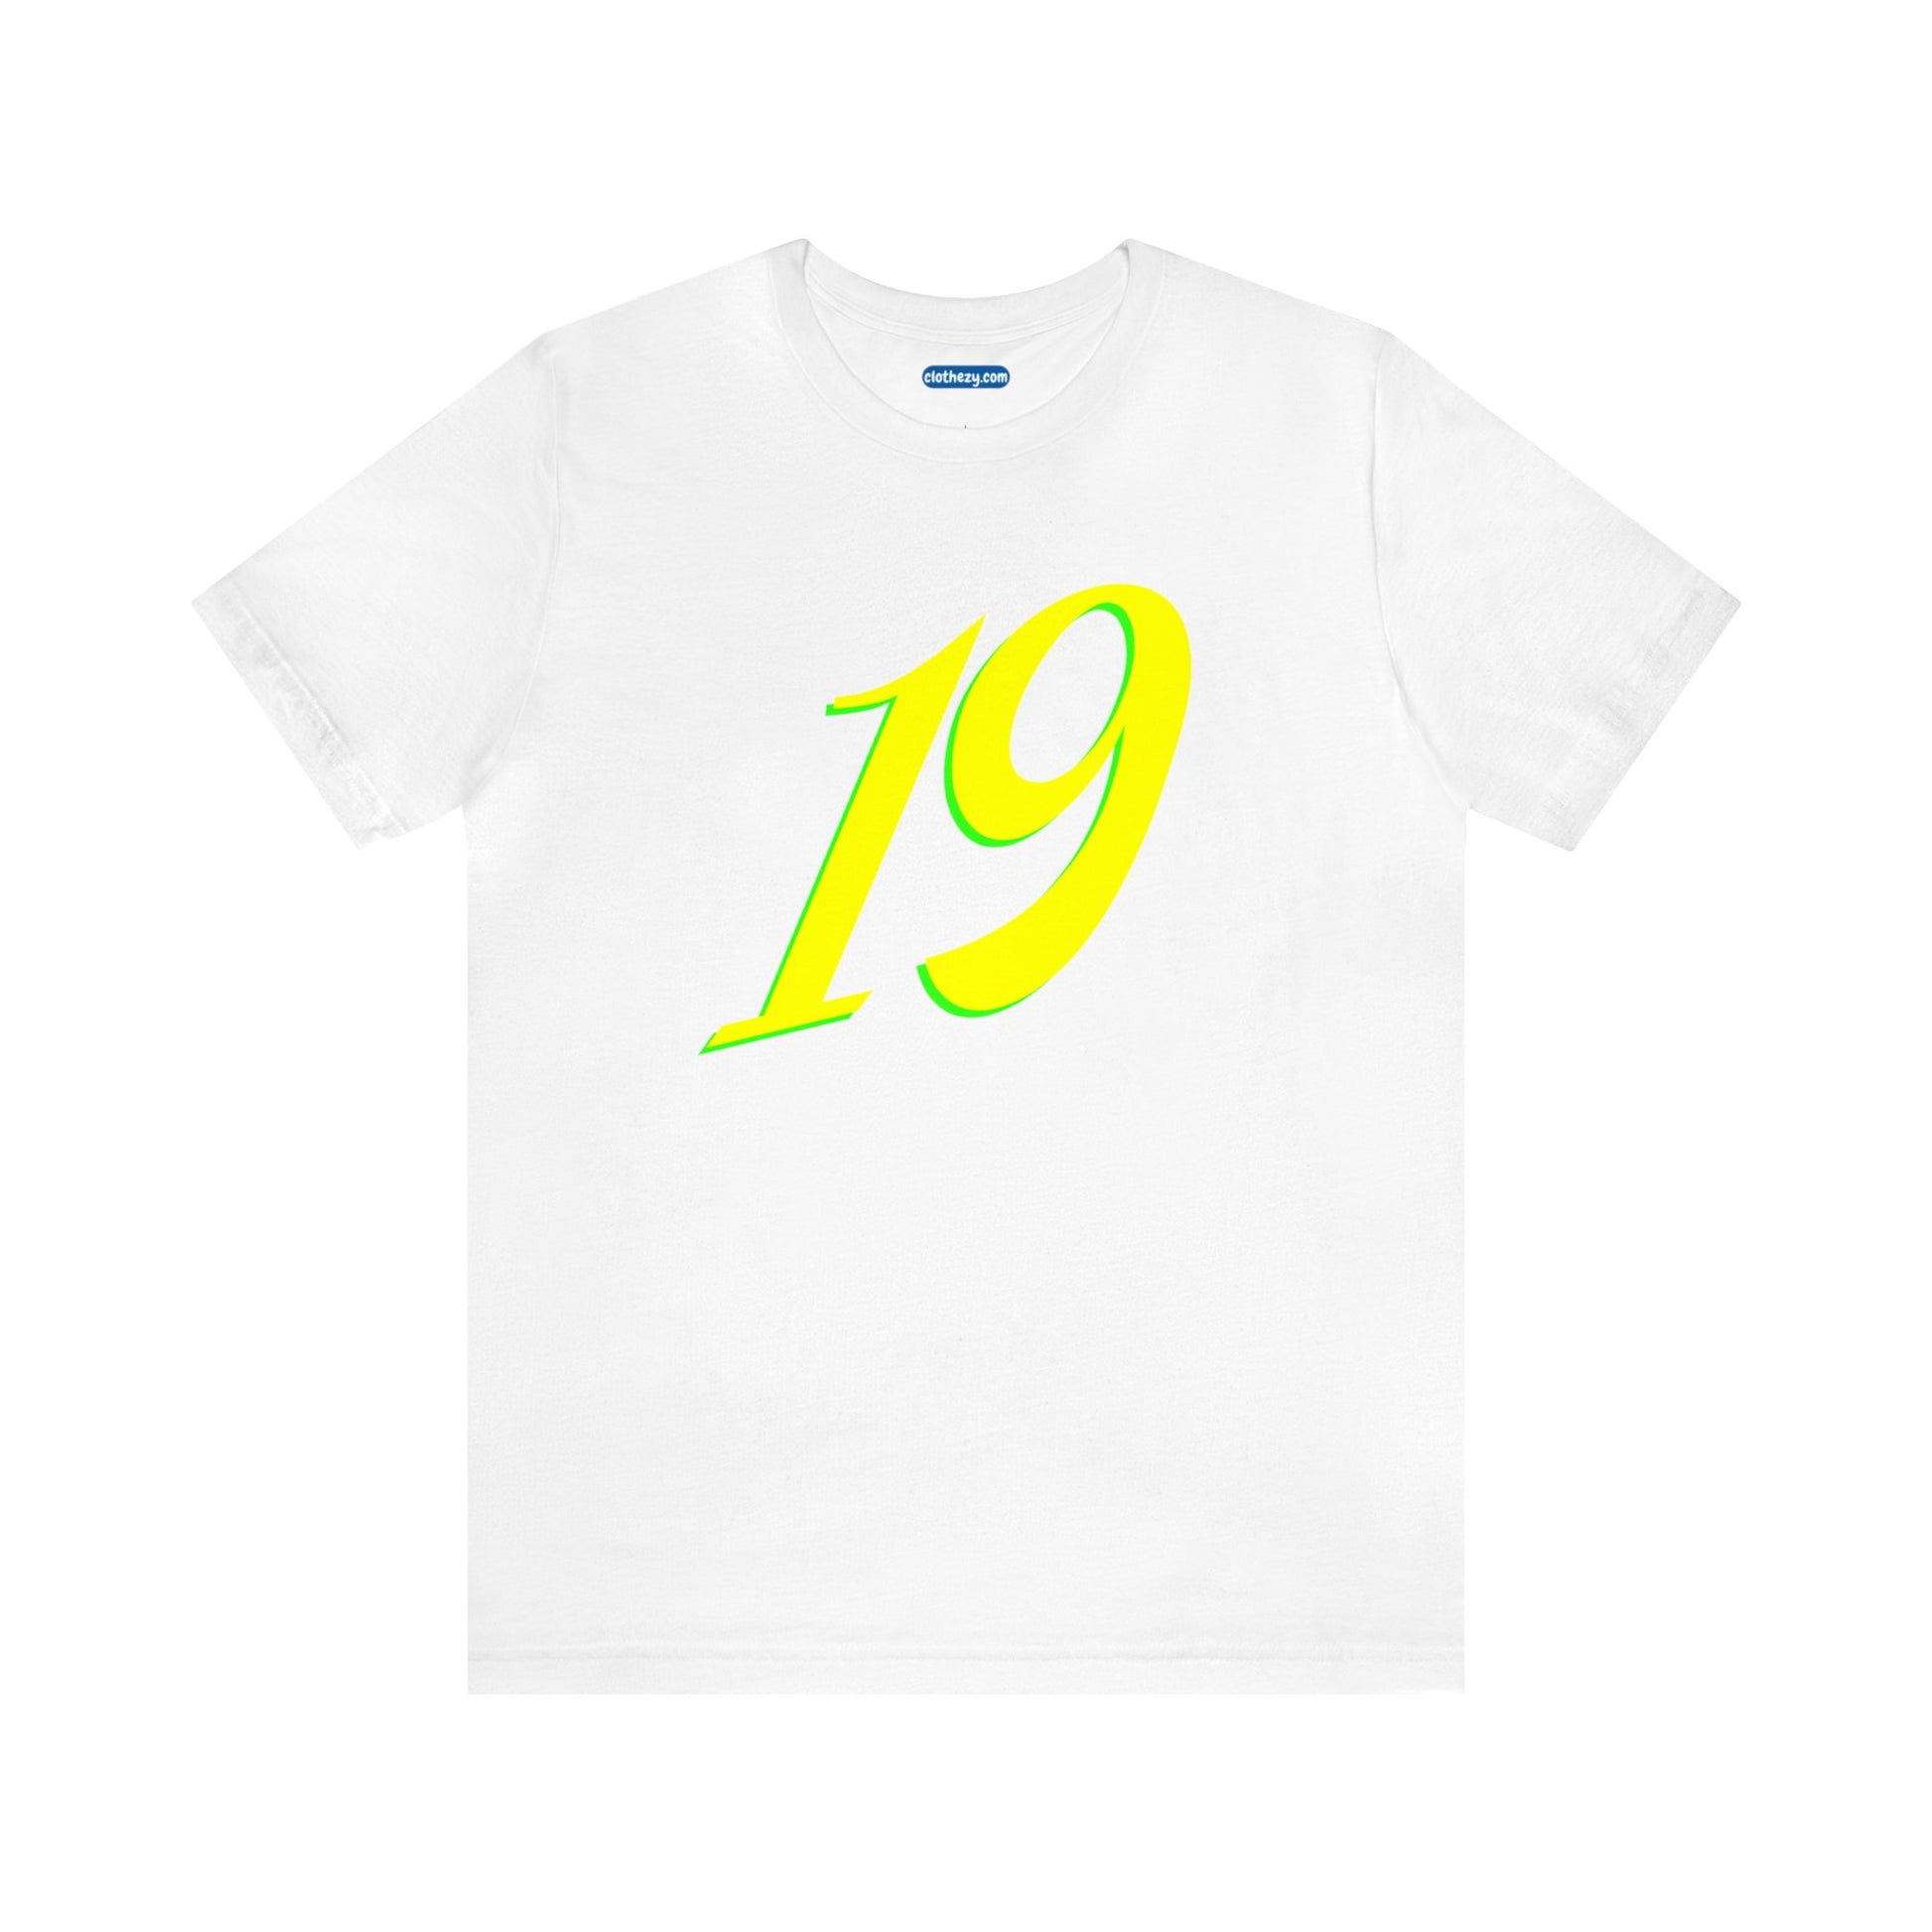 Number 19 Design - Soft Cotton Tee for birthdays and celebrations, Gift for friends and family, Multiple Options by clothezy.com in White Size Small - Buy Now